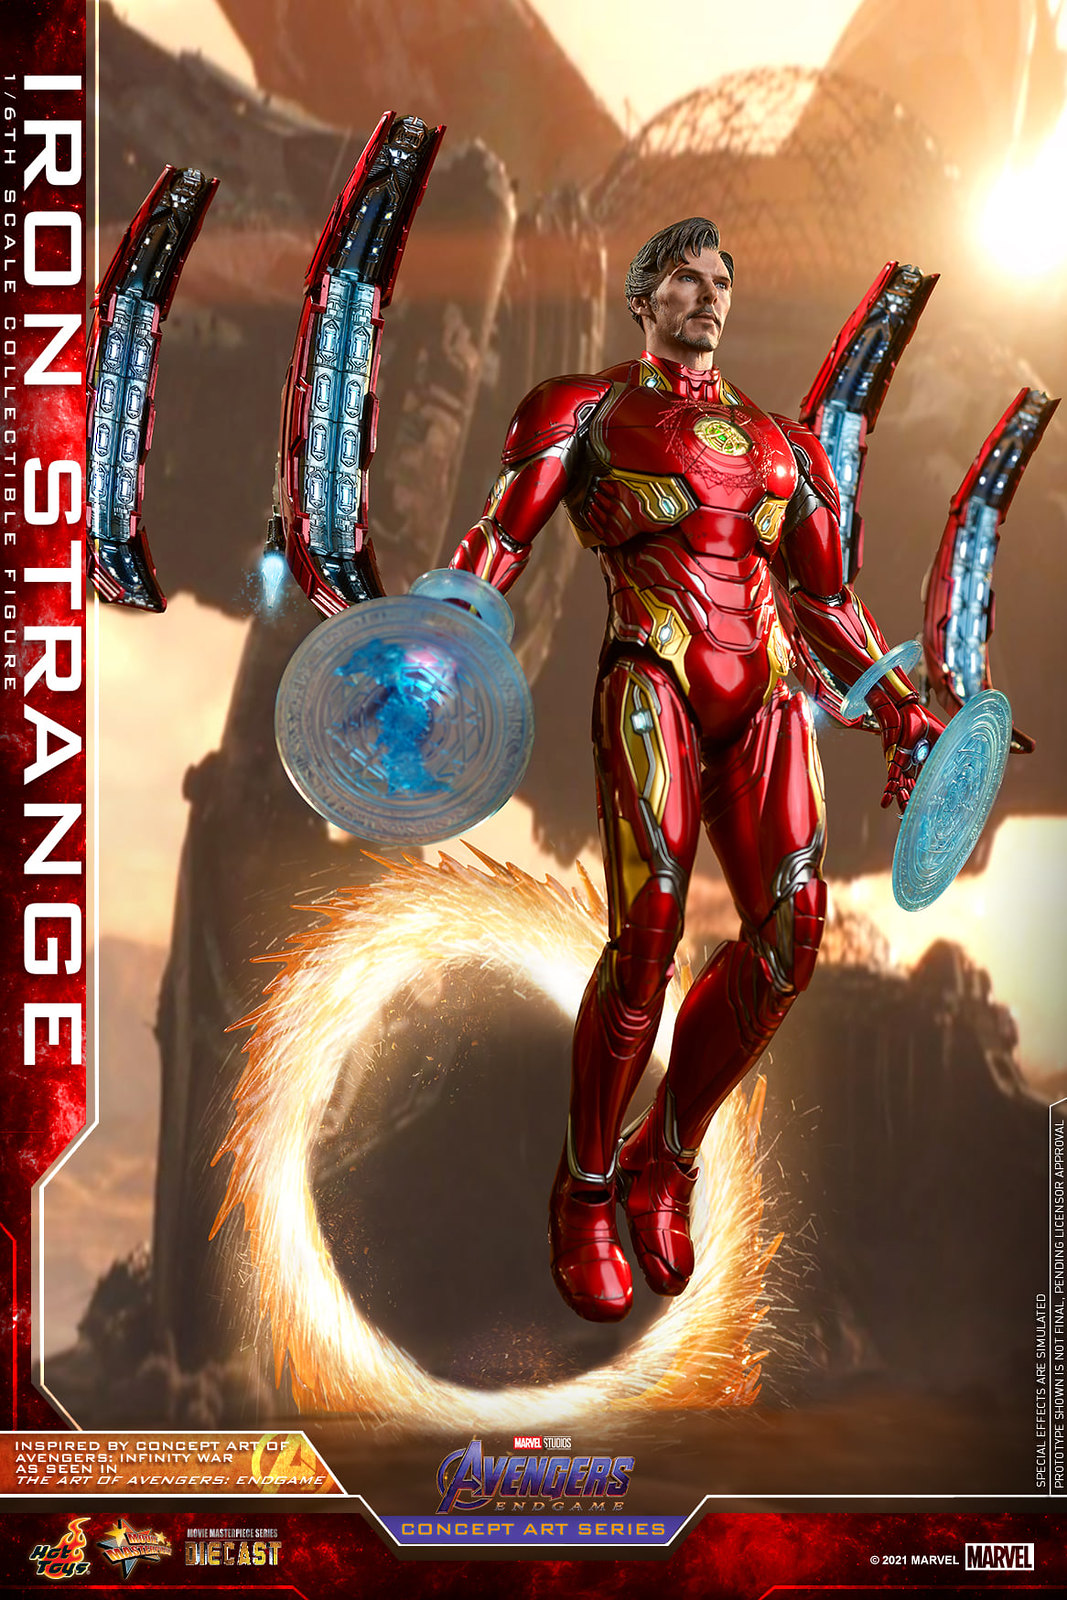 NEW PRODUCT: Hot Toys Avengers: Endgame (Concept Art Series) - 1/6th scale Iron Strange Collectible Figure 51311429783_aac1266602_h